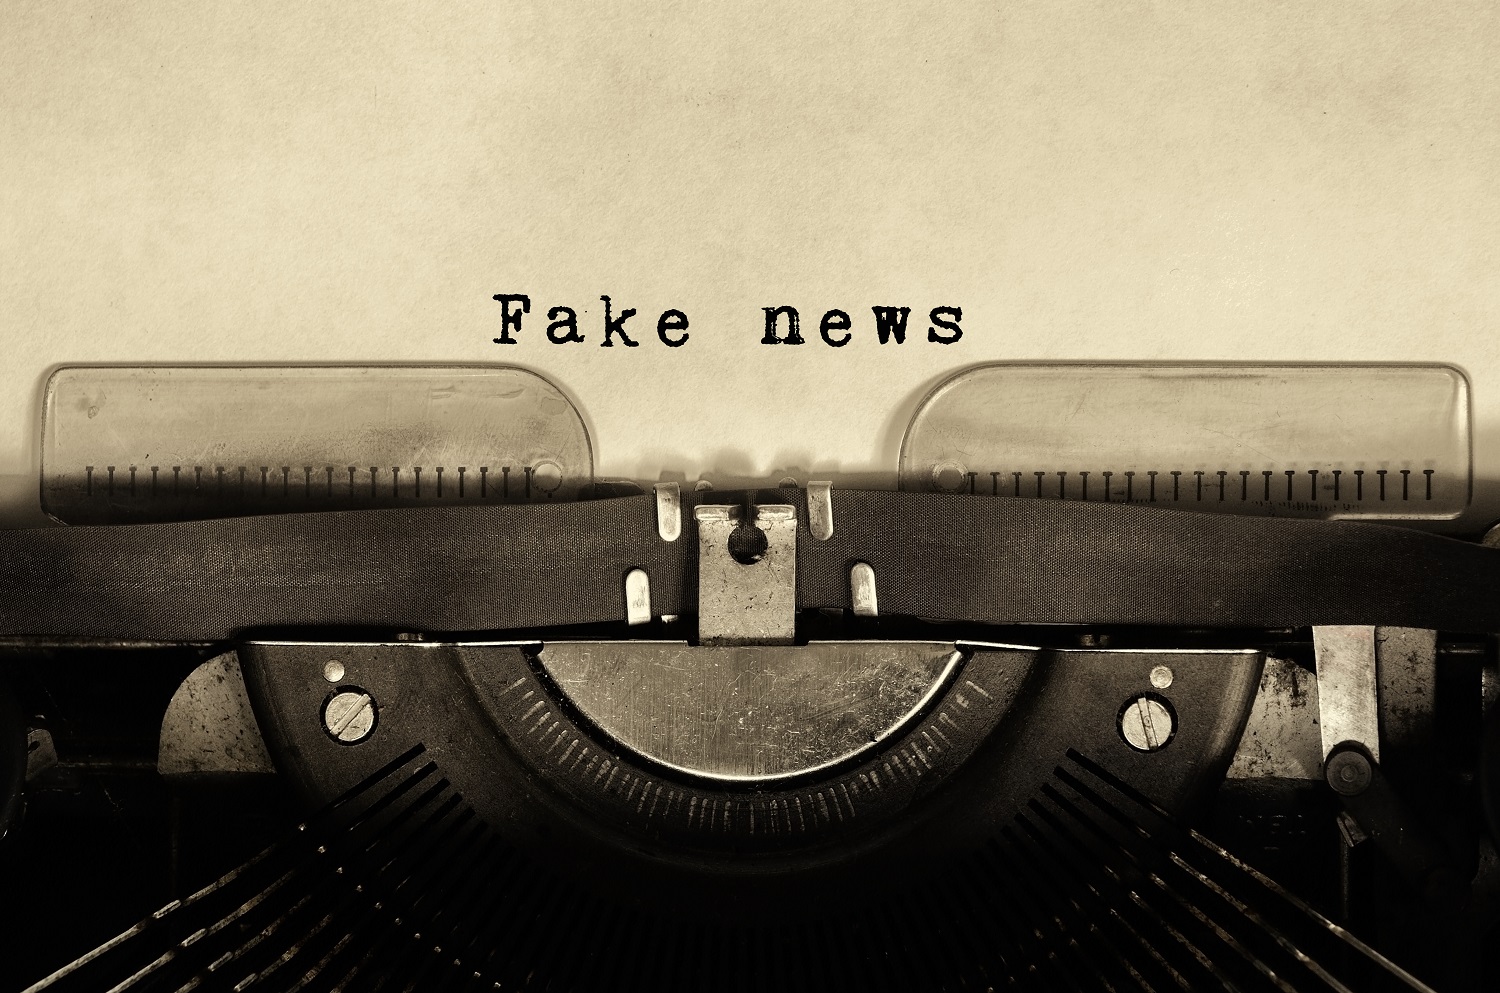 Fake news has always existed, but quality journalism has a history of survival